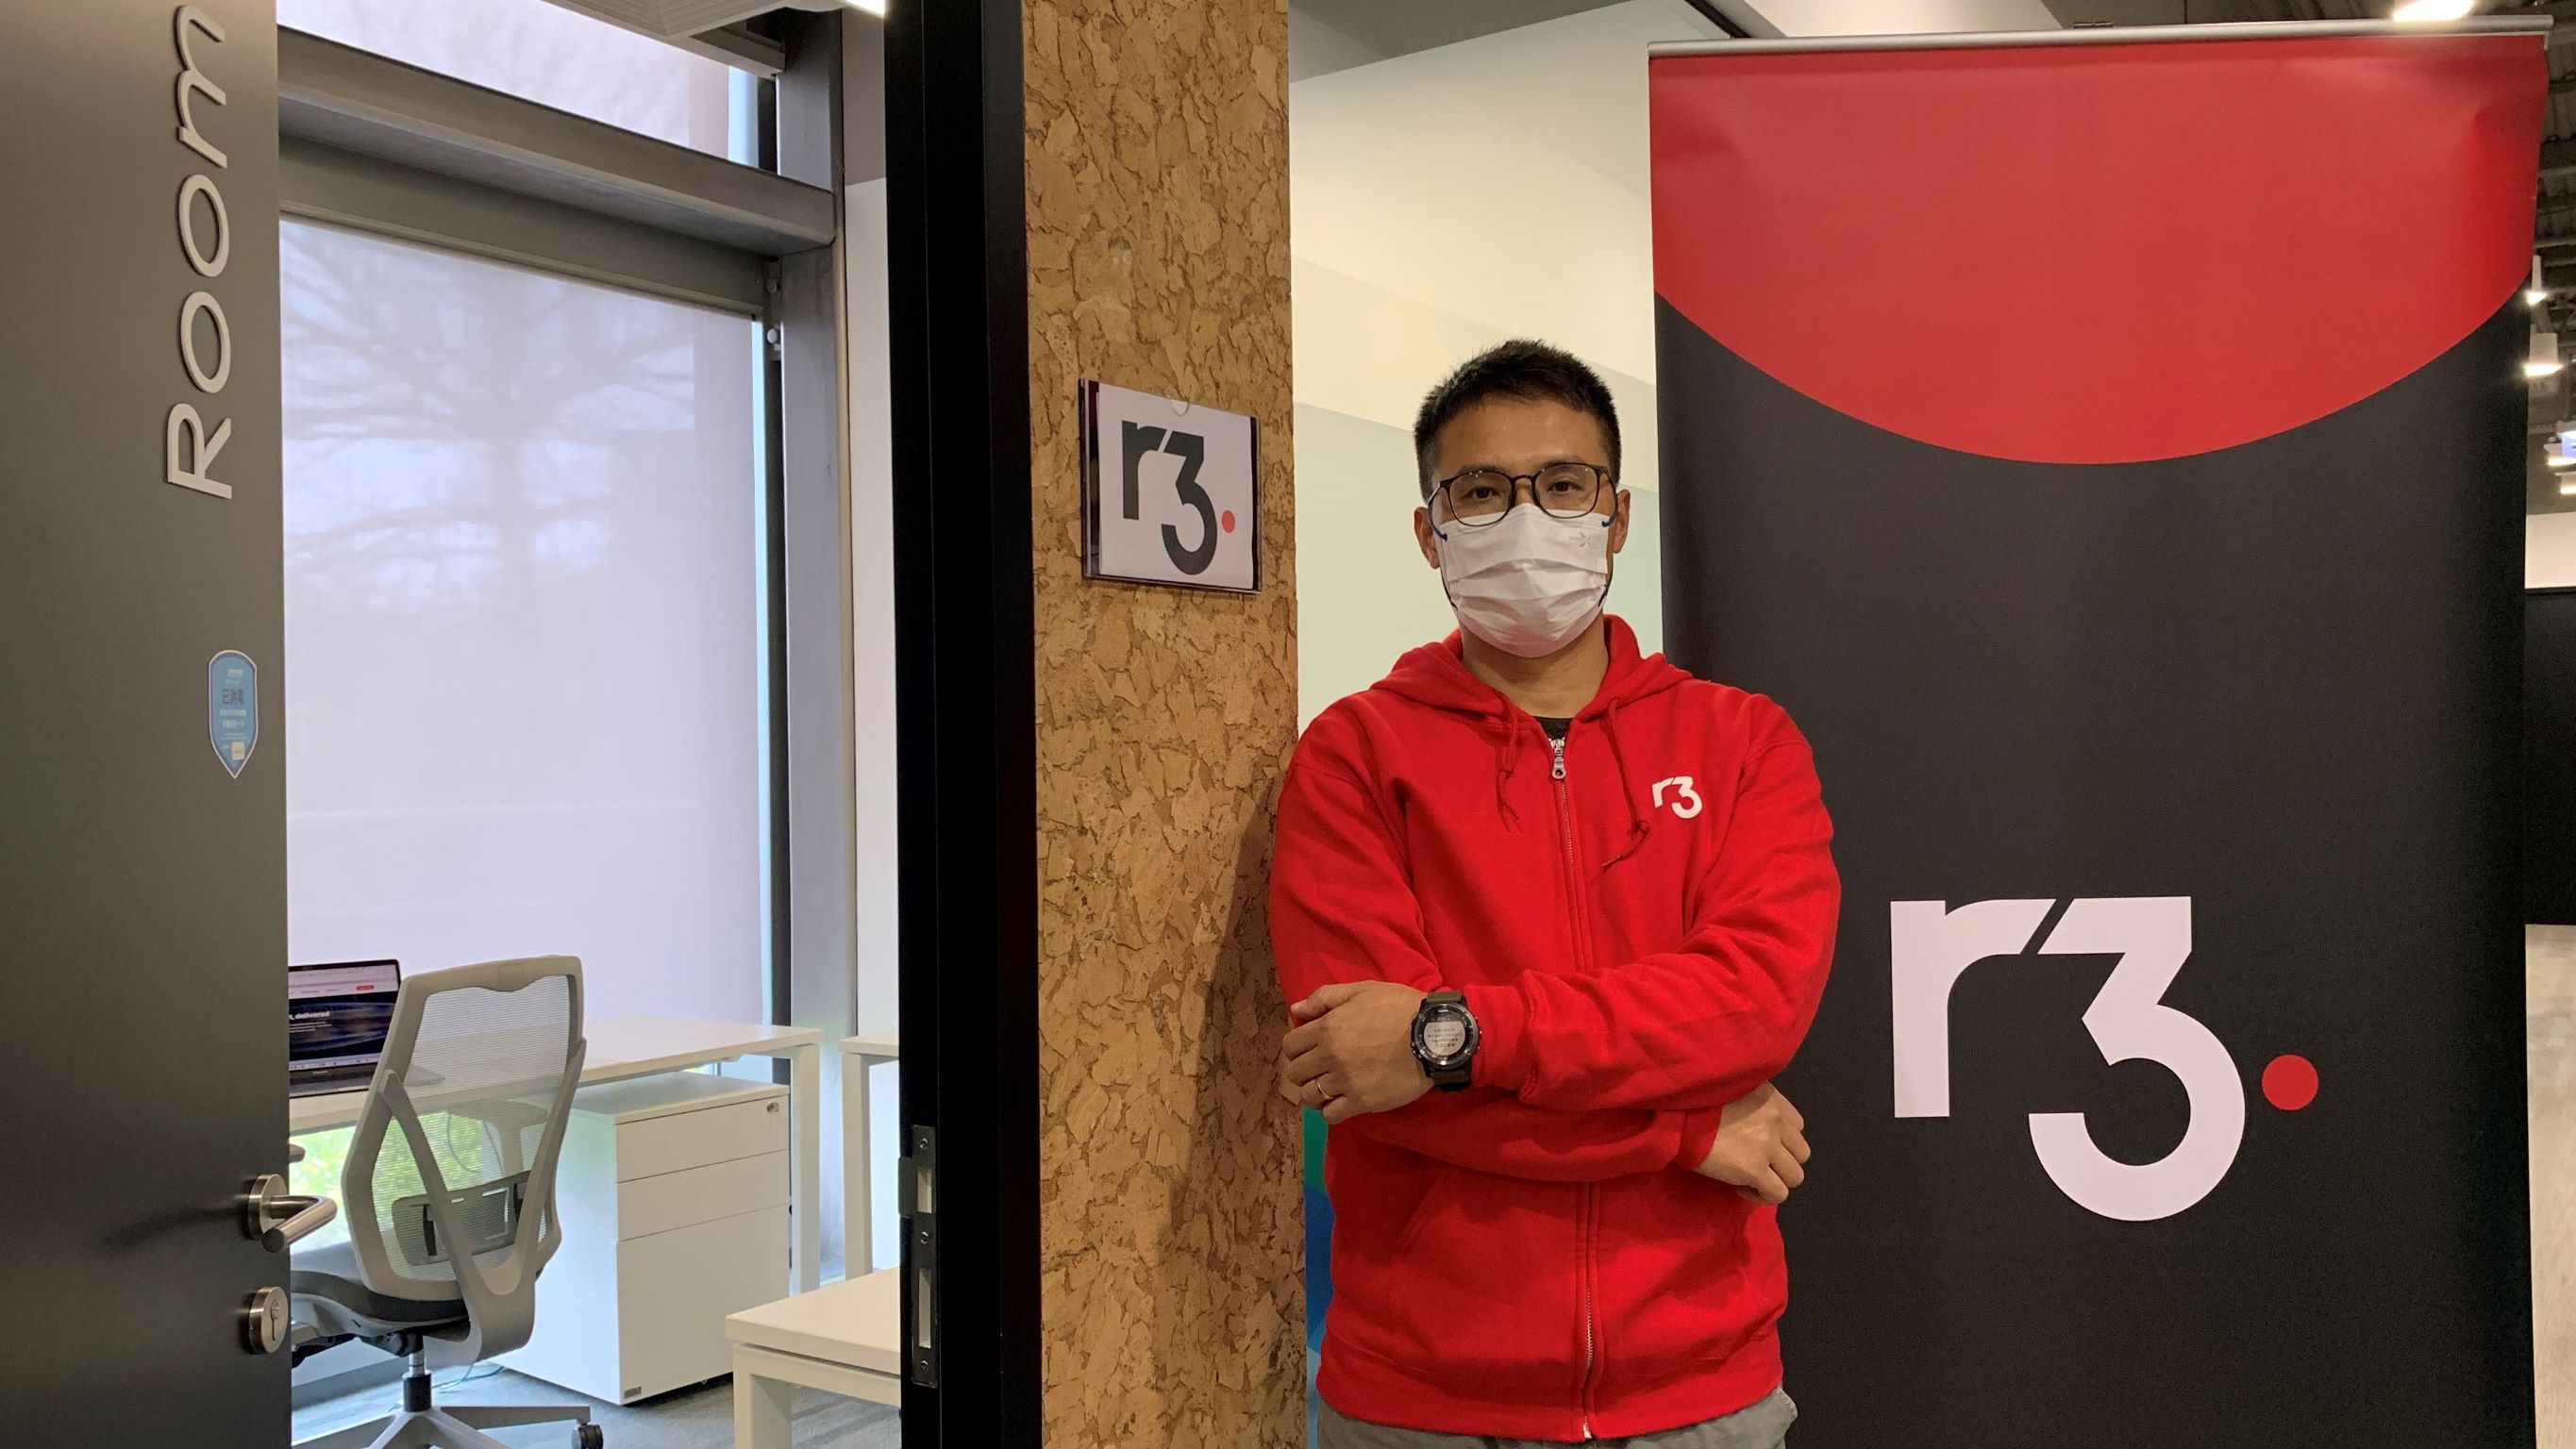 Global Blockchain Leader R3 Establishes Innovation Lab at Cyberport to Help Hong Kong FinTechs Seize CBDC Opportunities